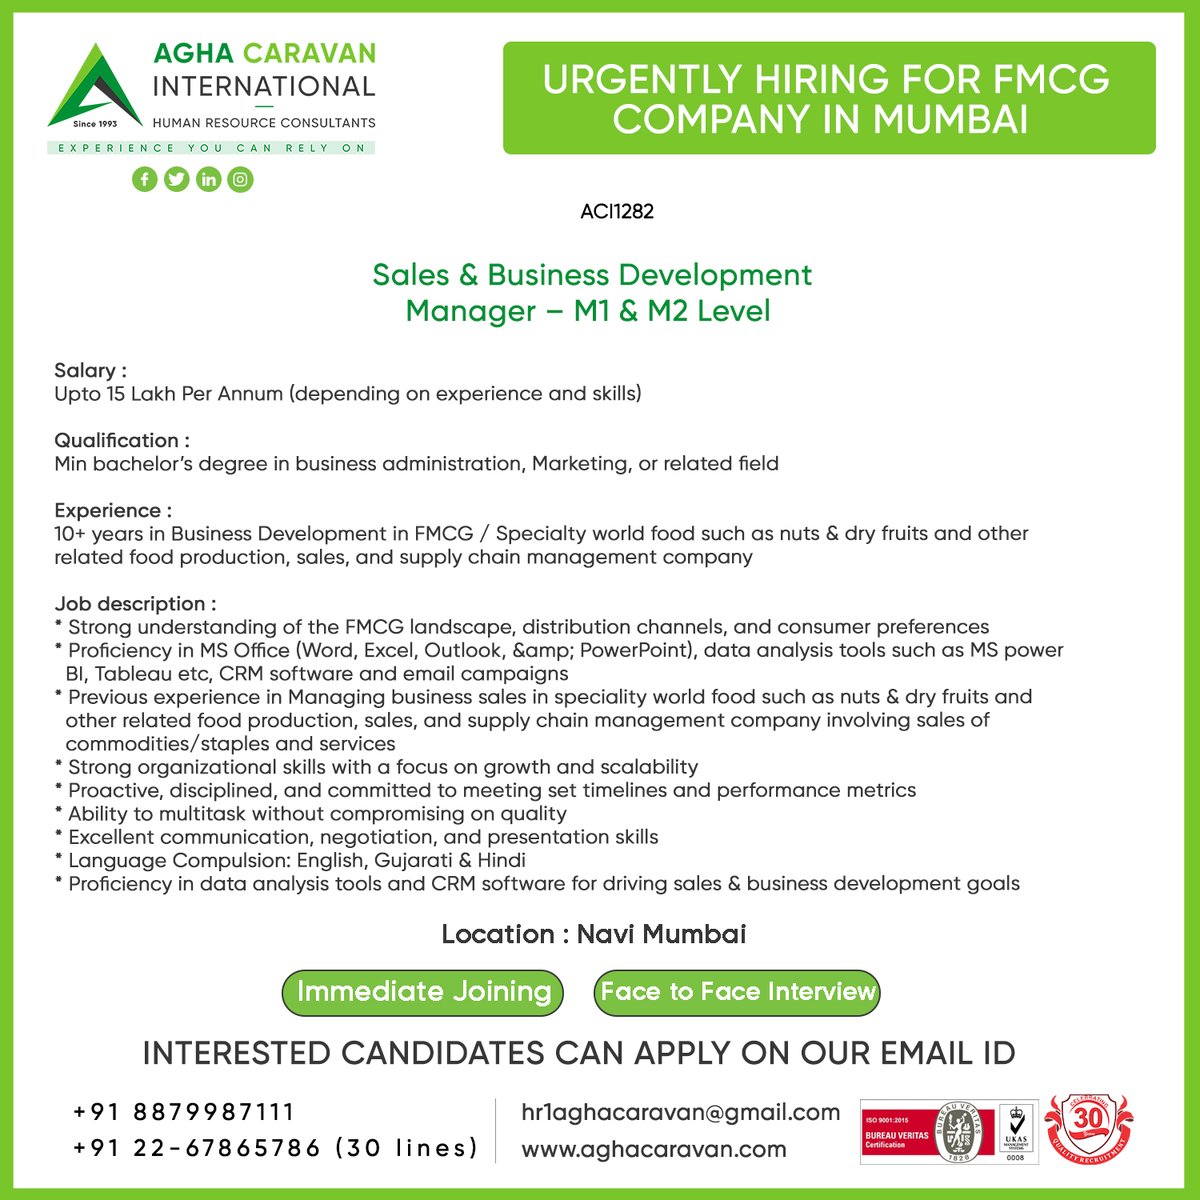 Greetings from Agha Caravan!
Kindly apply on the given email with your updated CV and position in the subject line.
Thank you.
#acijobs #jobseekers #mumbaijobs #mumbai #businessdevelopement #manager #applynow #jobvacancy #Jobopportunity